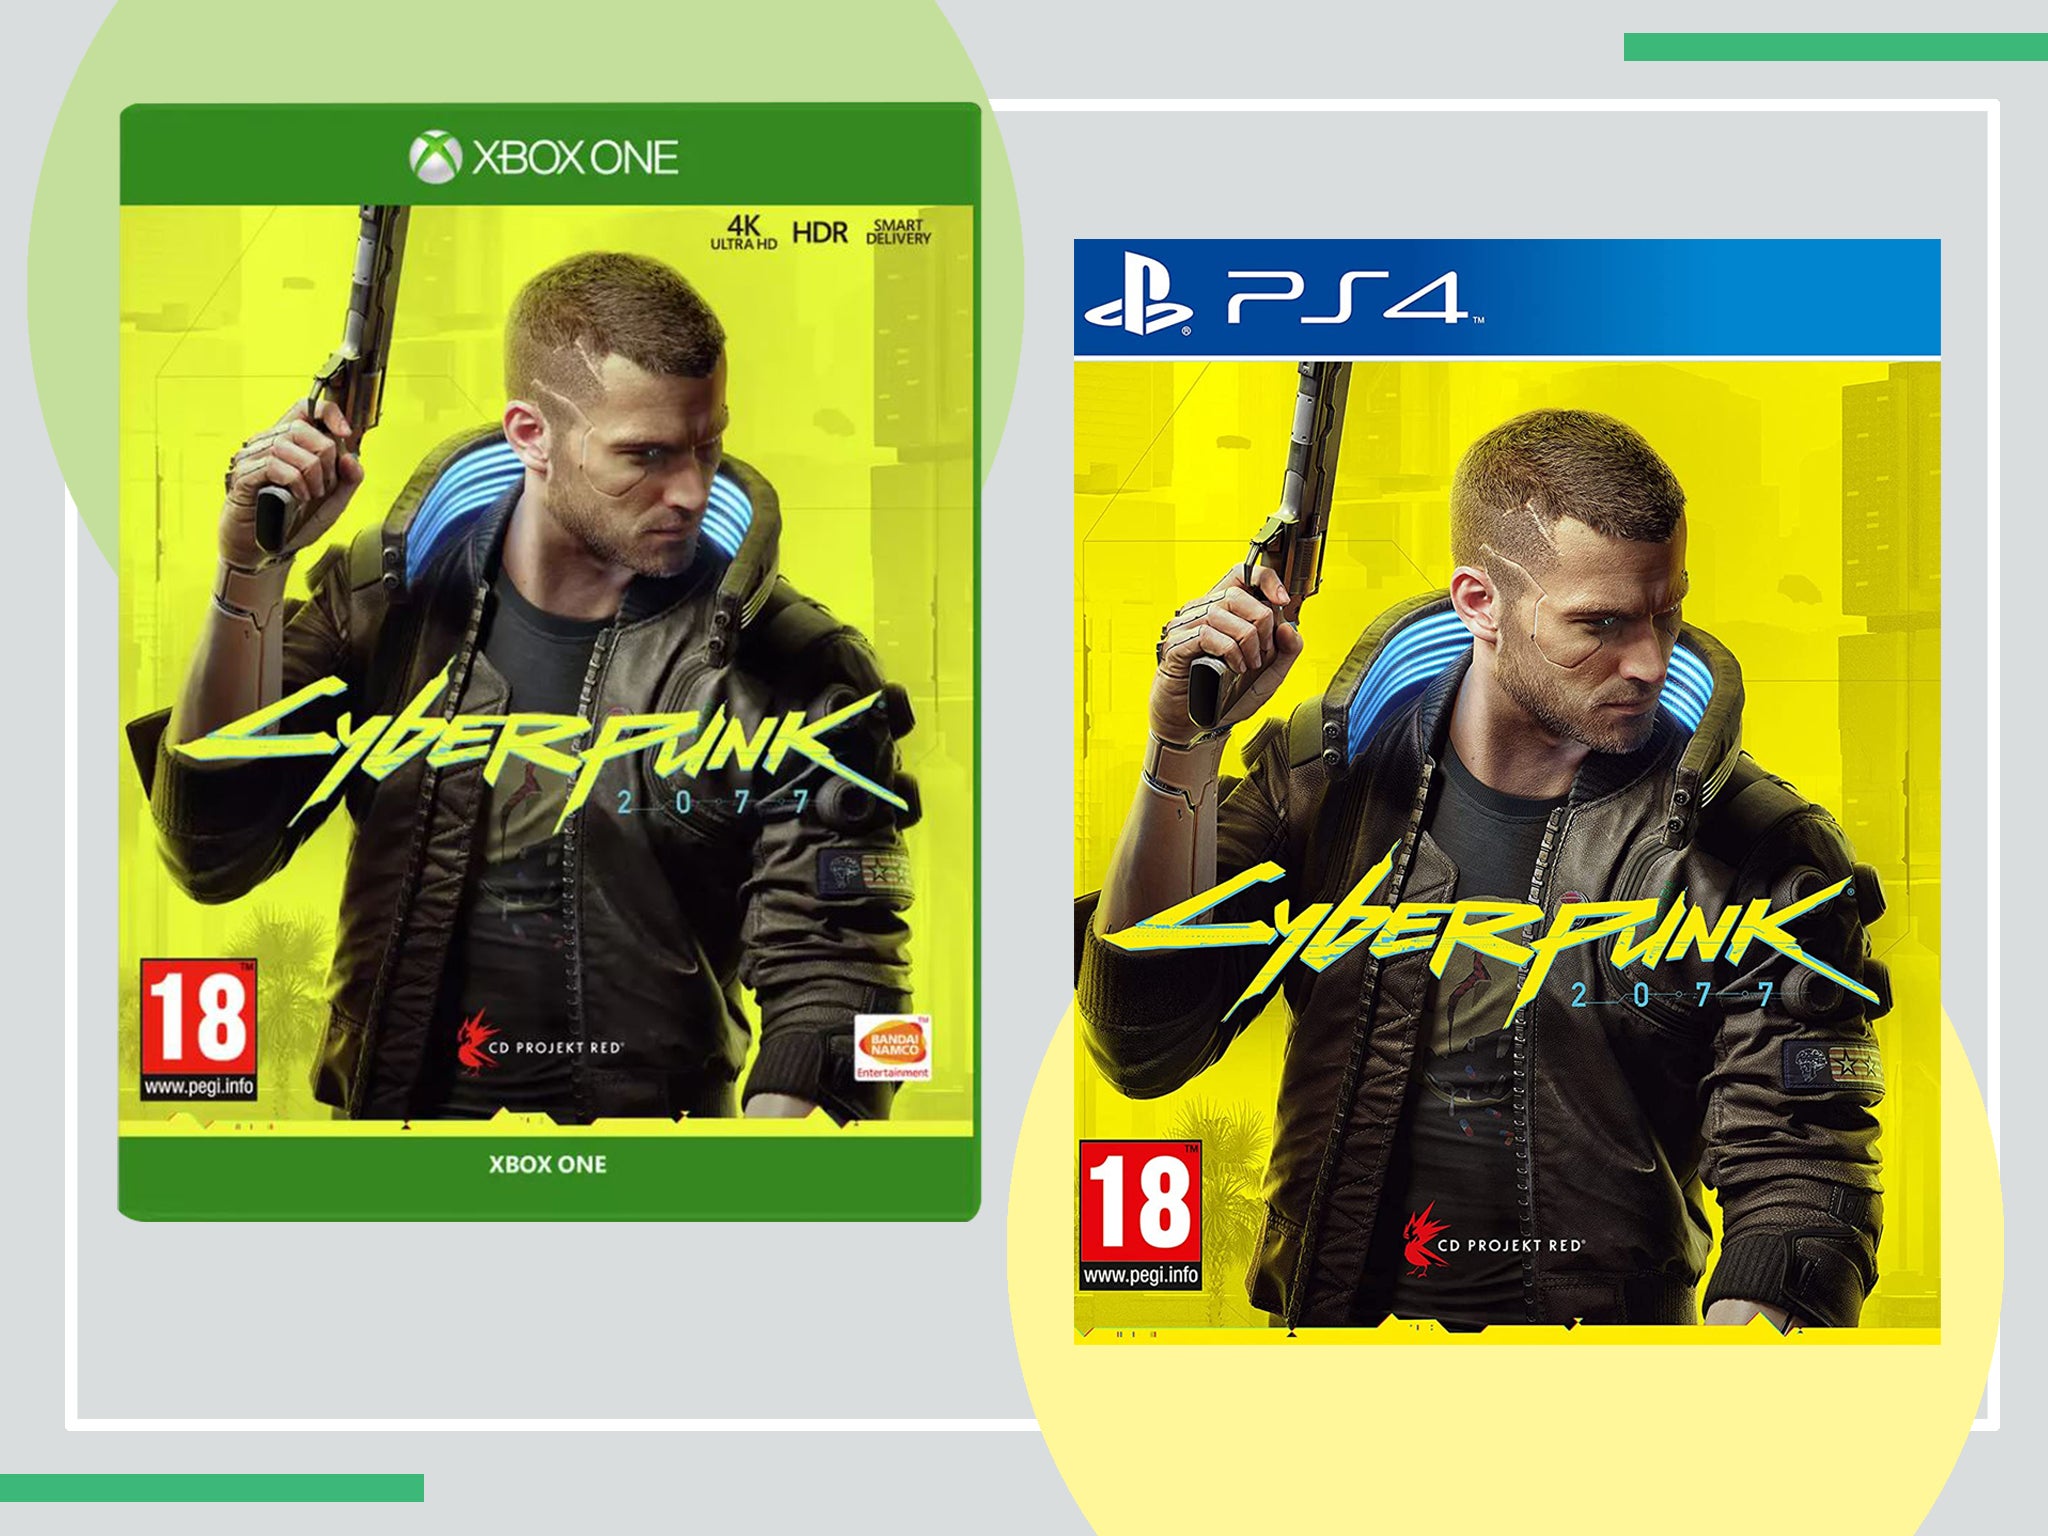 Cyberpunk 2077 Console Ray Tracing, PS5, PS4, Xbox Series X